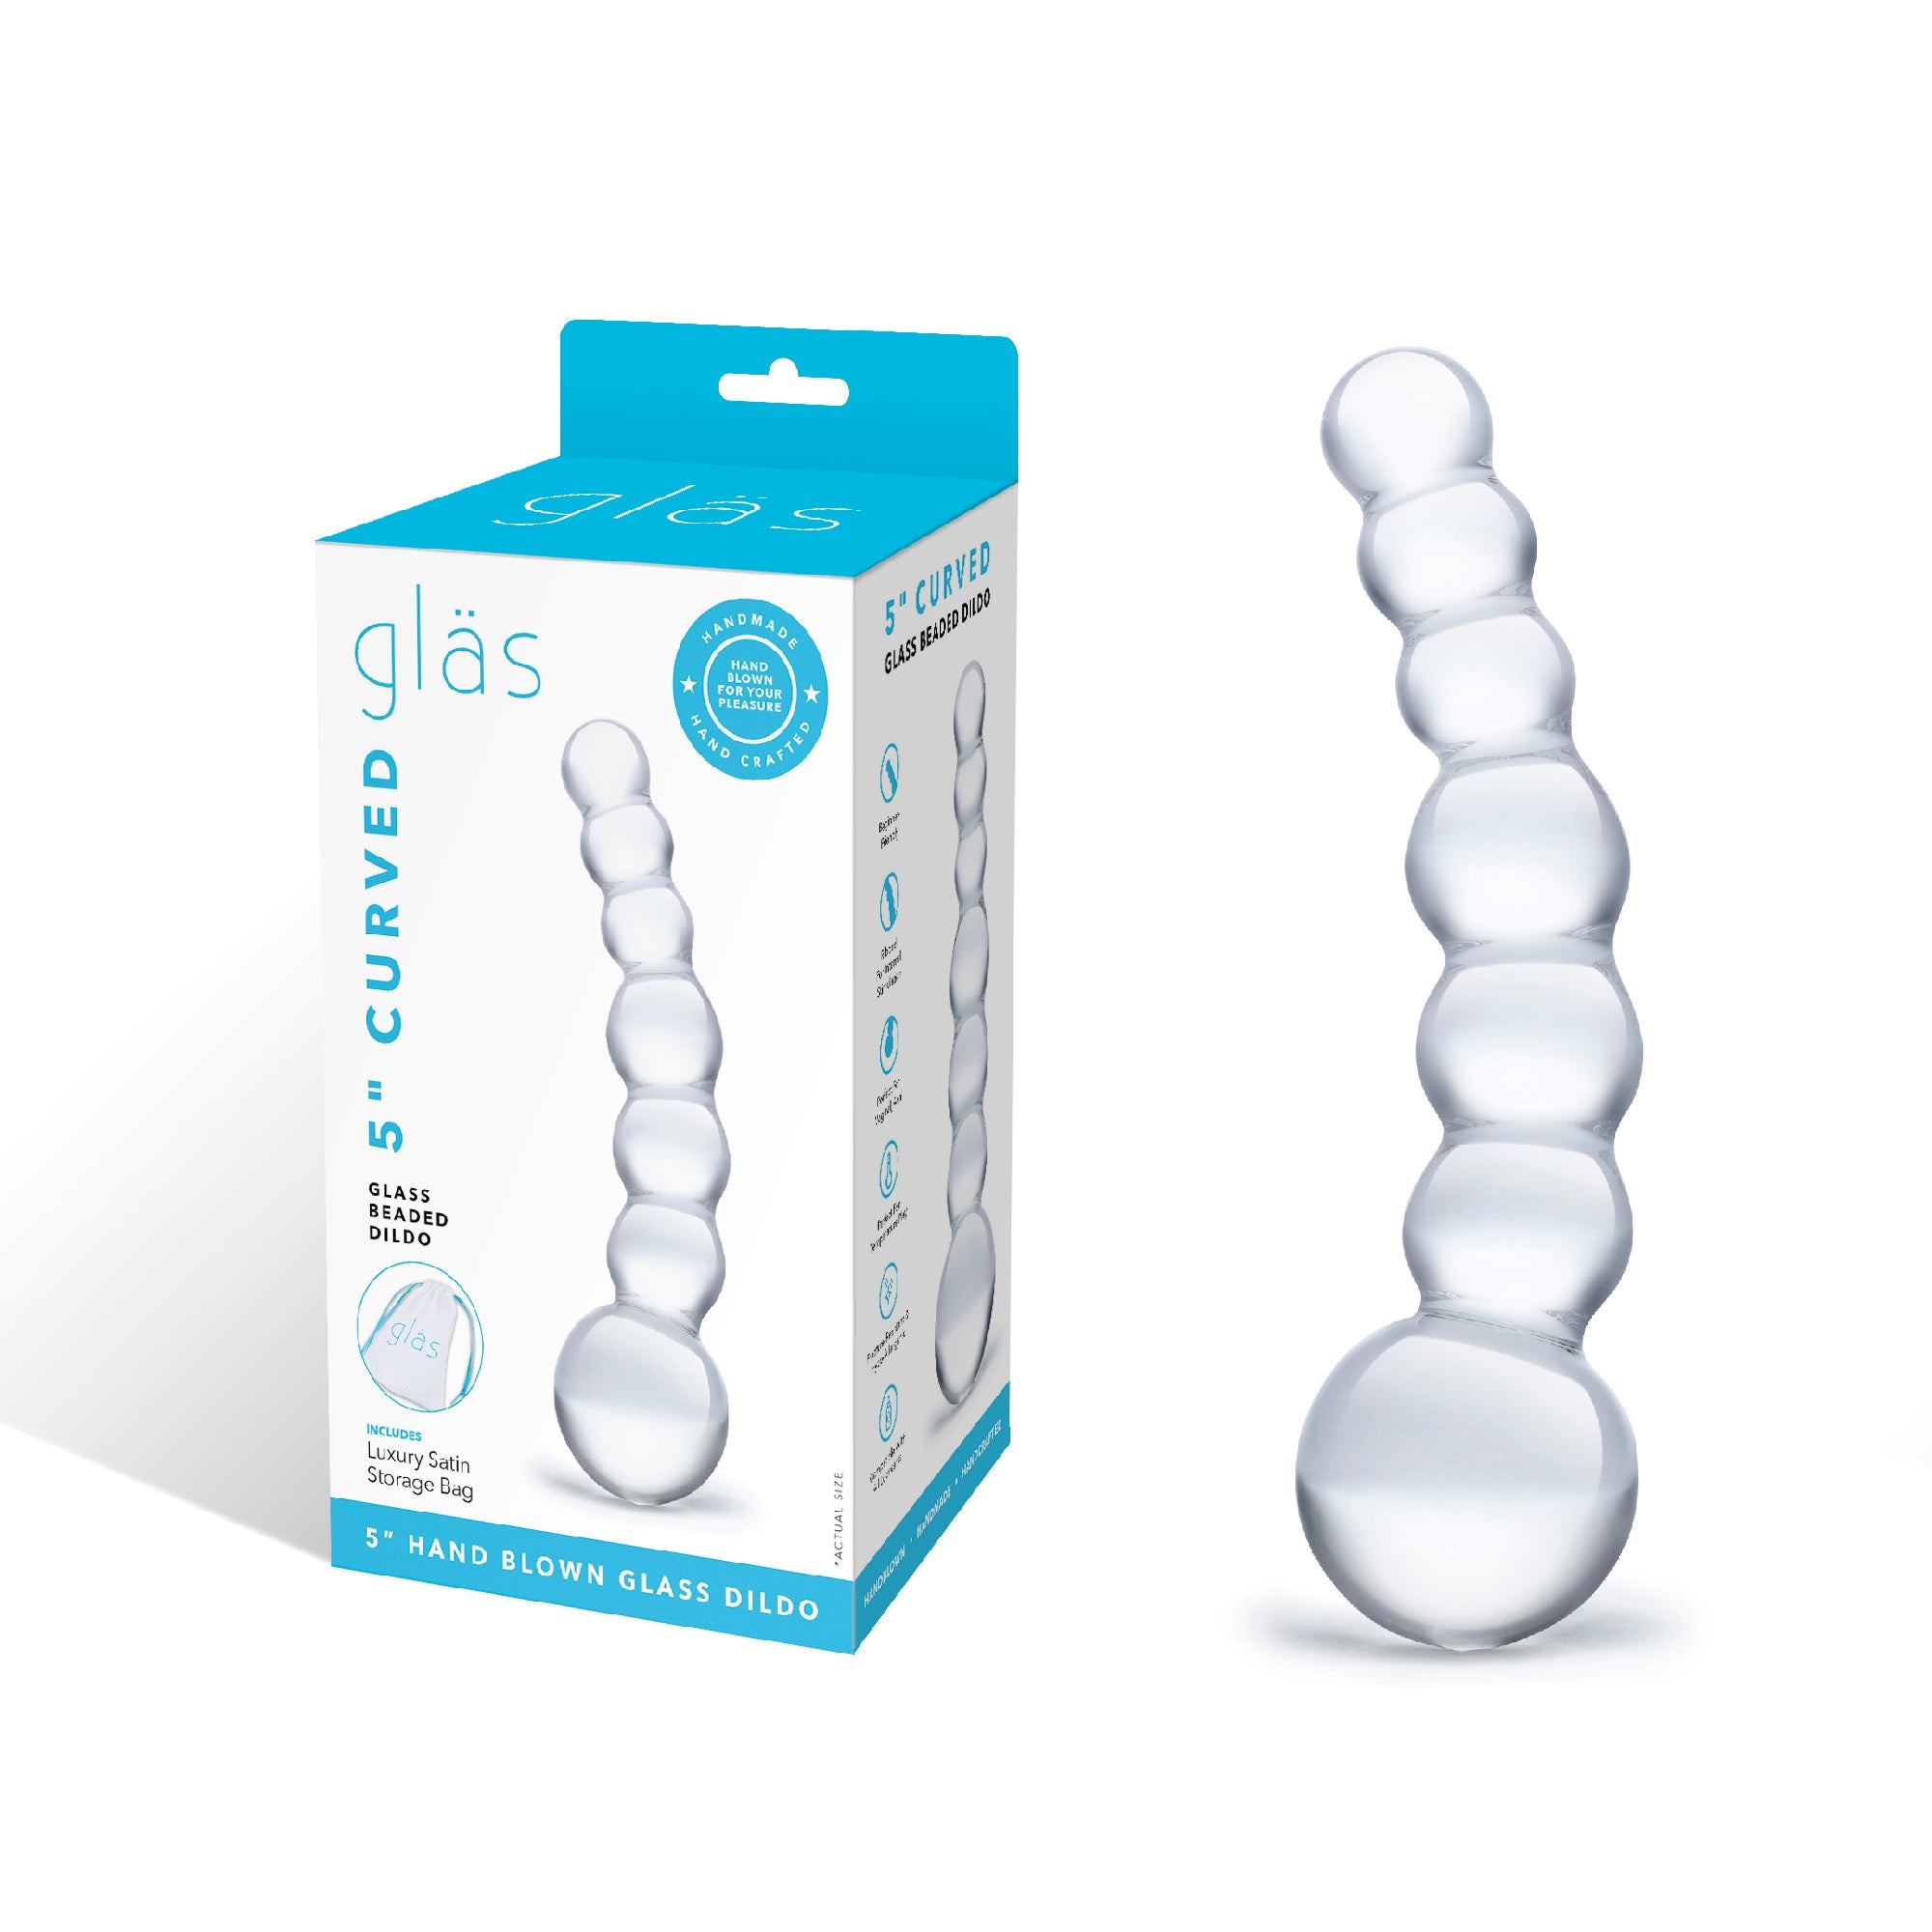 Glas - Curved Glass Beaded Hand Blown Glass Dildo 5" (Clear)